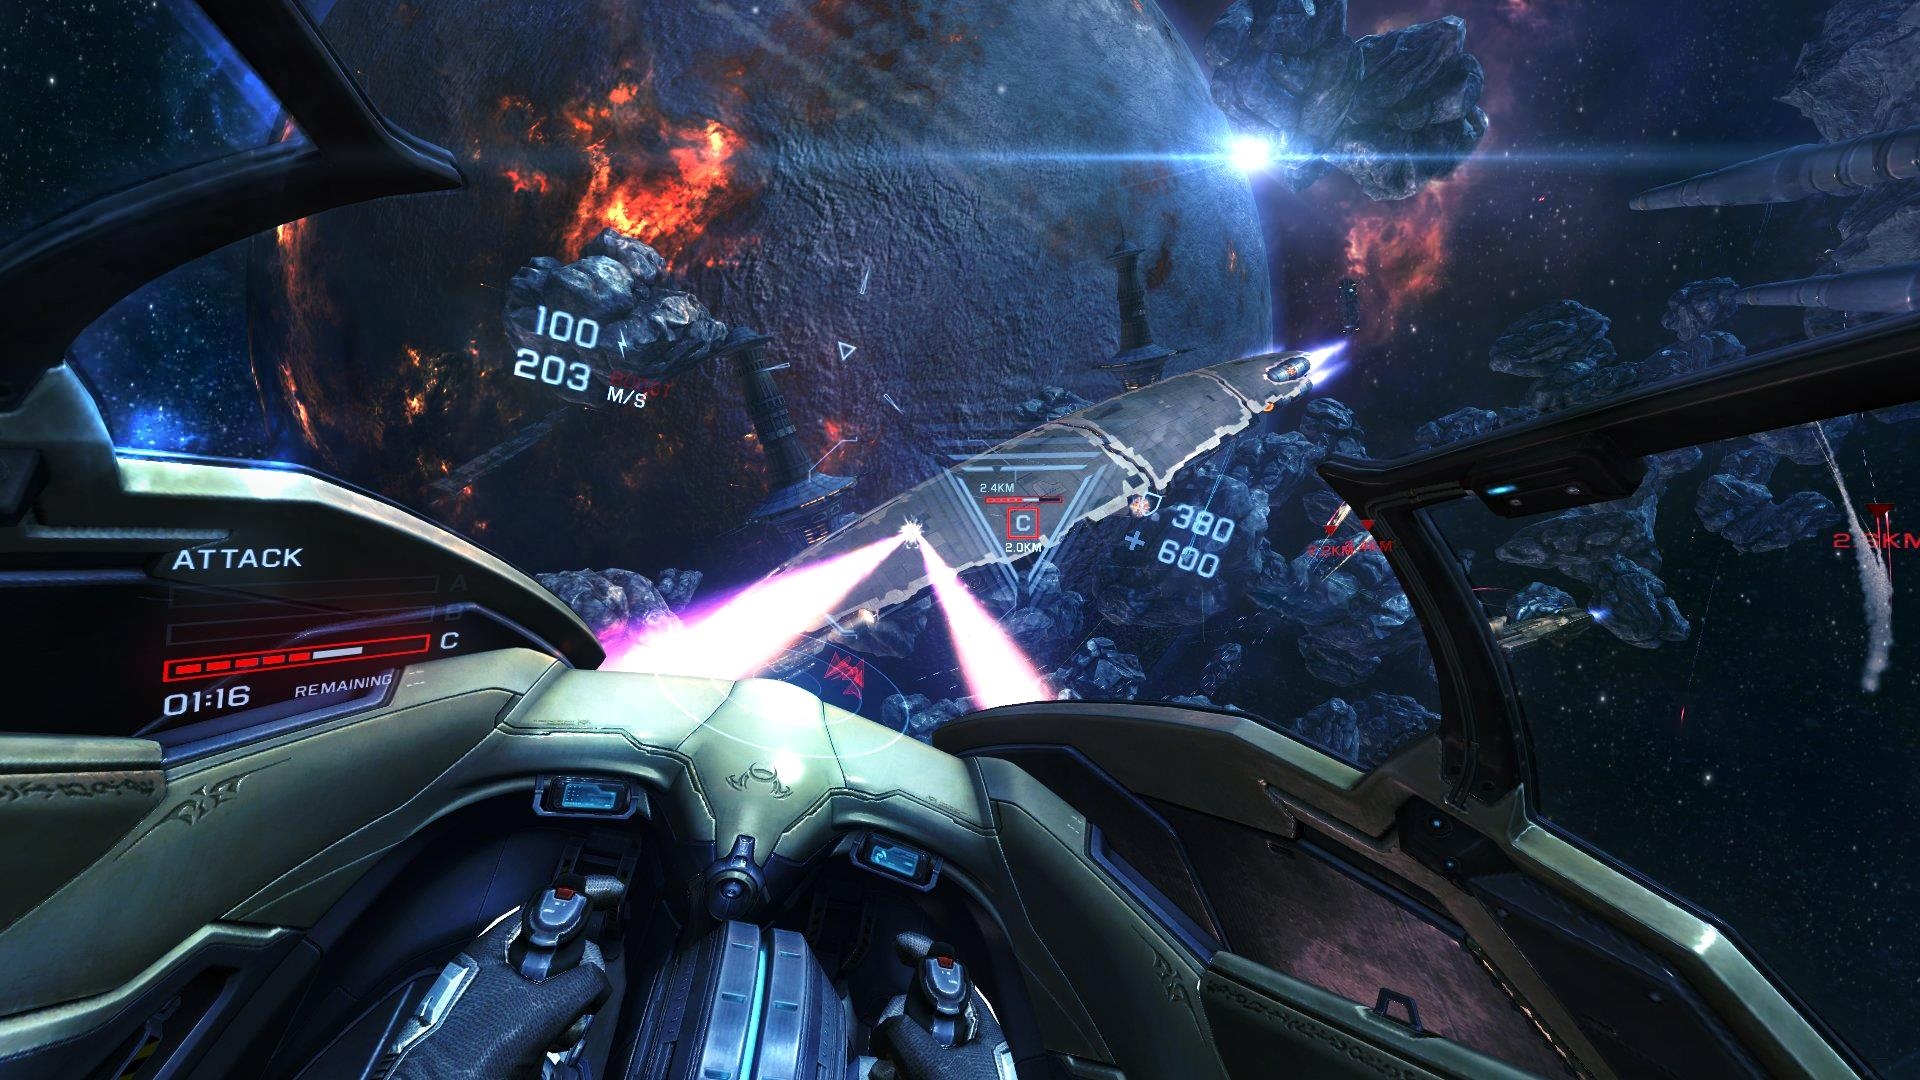 EVE: Valkyrie is Going to Look Amazing in Virtual Reality, Oculus and Morpheus Both Confirmed